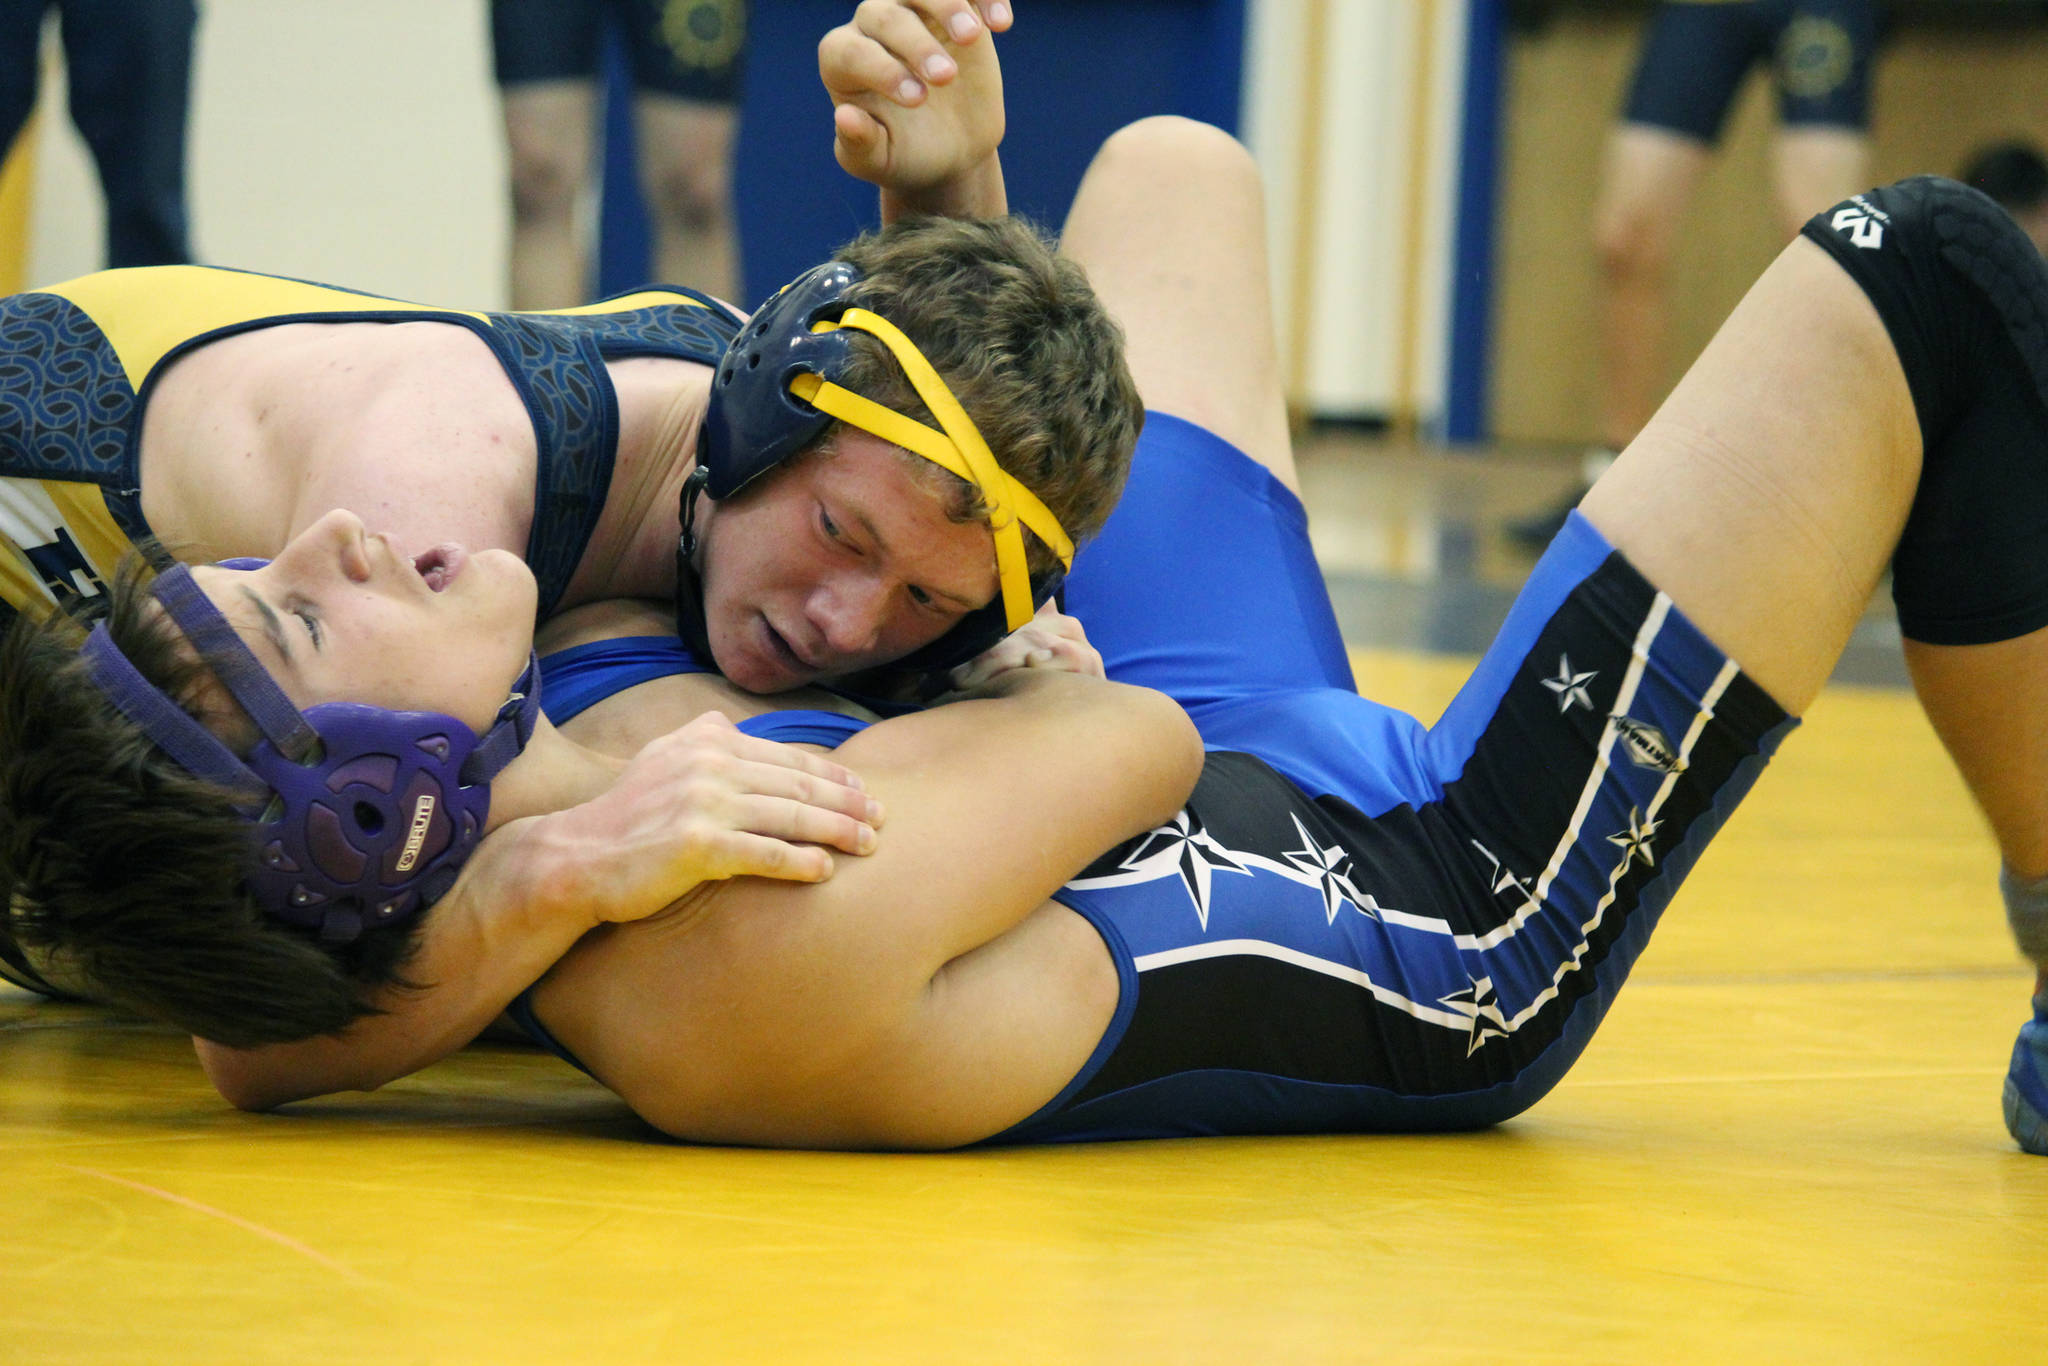 Homer’s Mose Hayes works on pinning Soldotna’s Israel Alley, who he eventually defeated, during a dual match between the two schools Friday, Oct. 19, 2018 at Homer High School in Homer, Alaska. (Photo by Megan Pacer/Homer News)